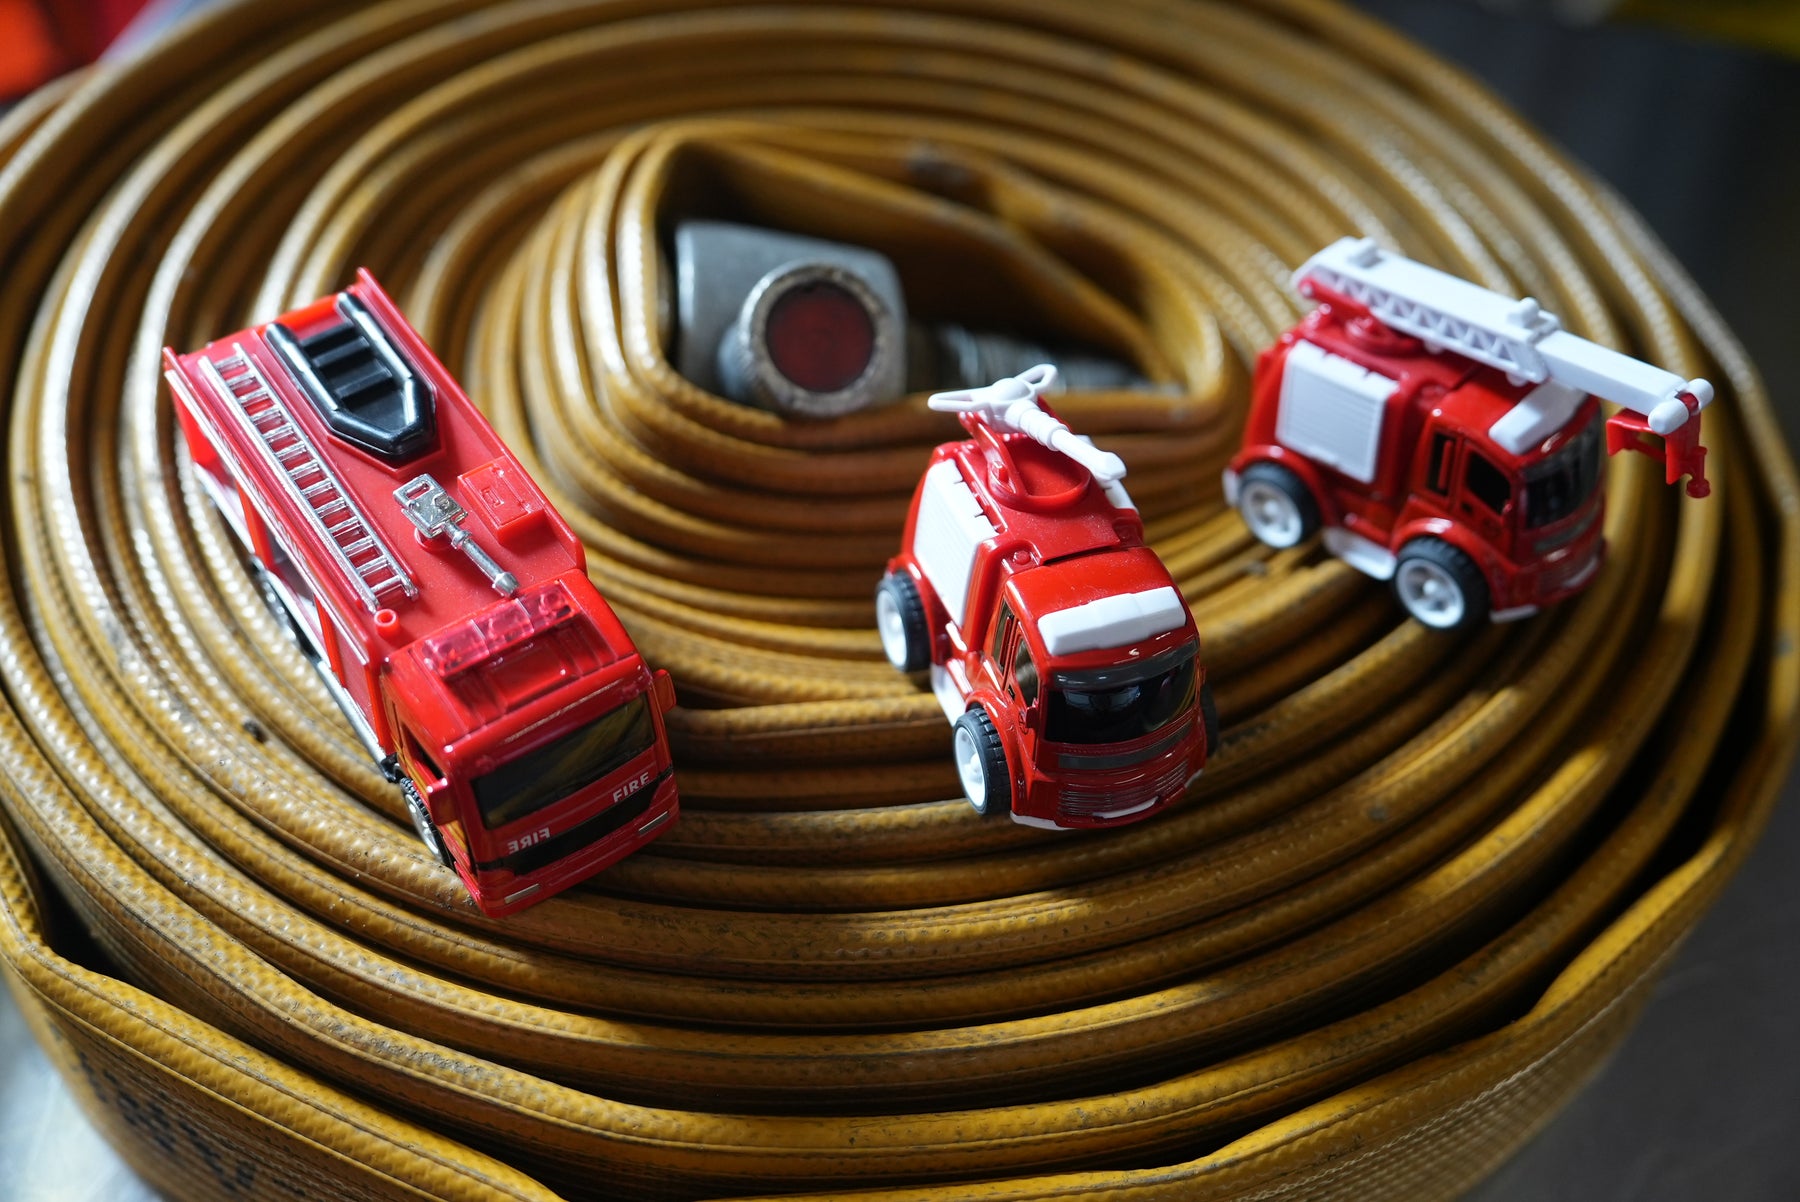 Fire Engine Toy